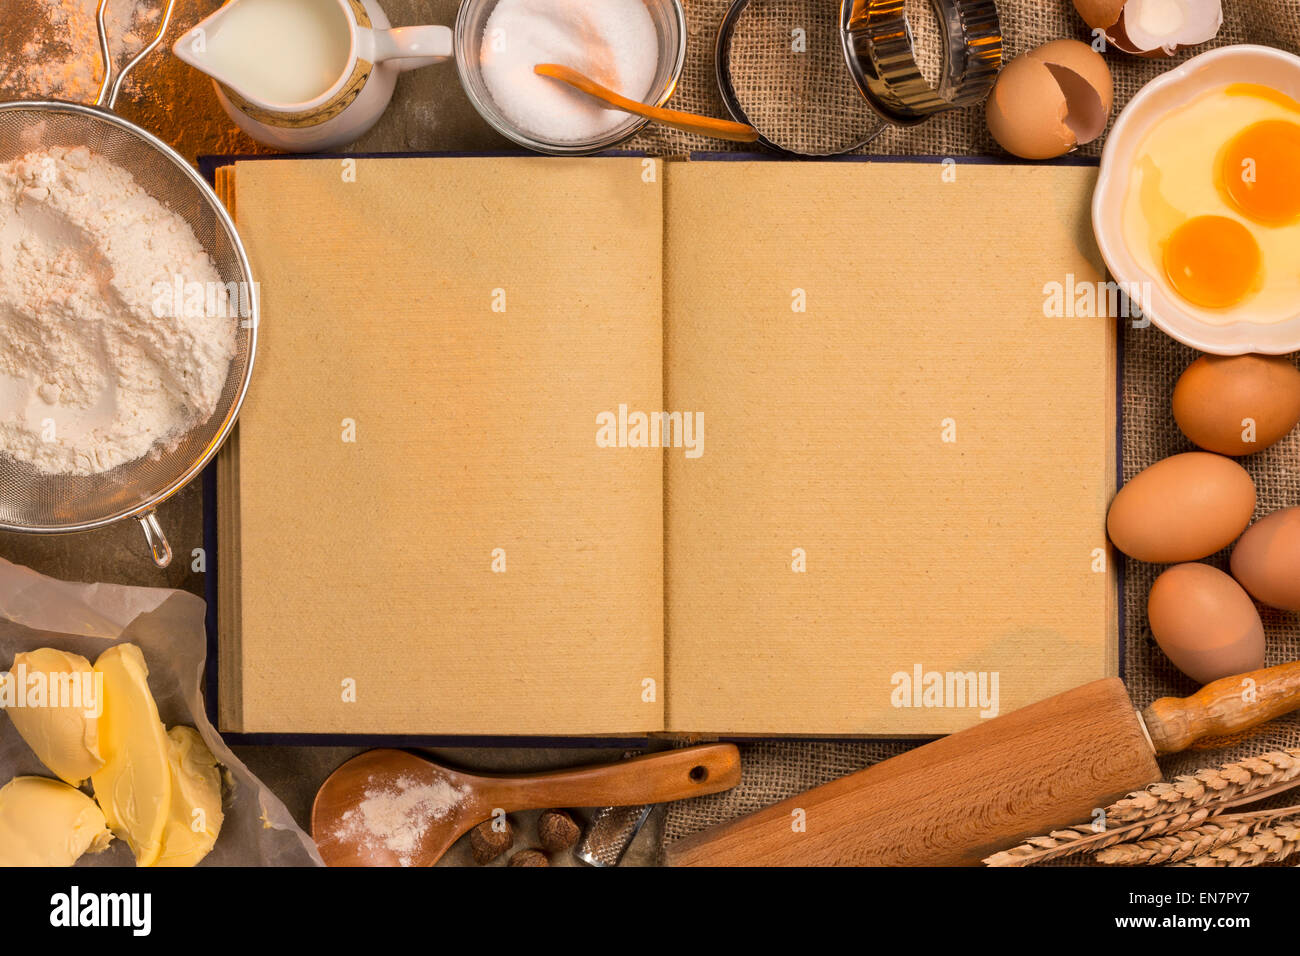 https://c8.alamy.com/comp/EN7PY7/blank-recipe-book-pages-space-for-text-with-baking-ingredients-and-EN7PY7.jpg